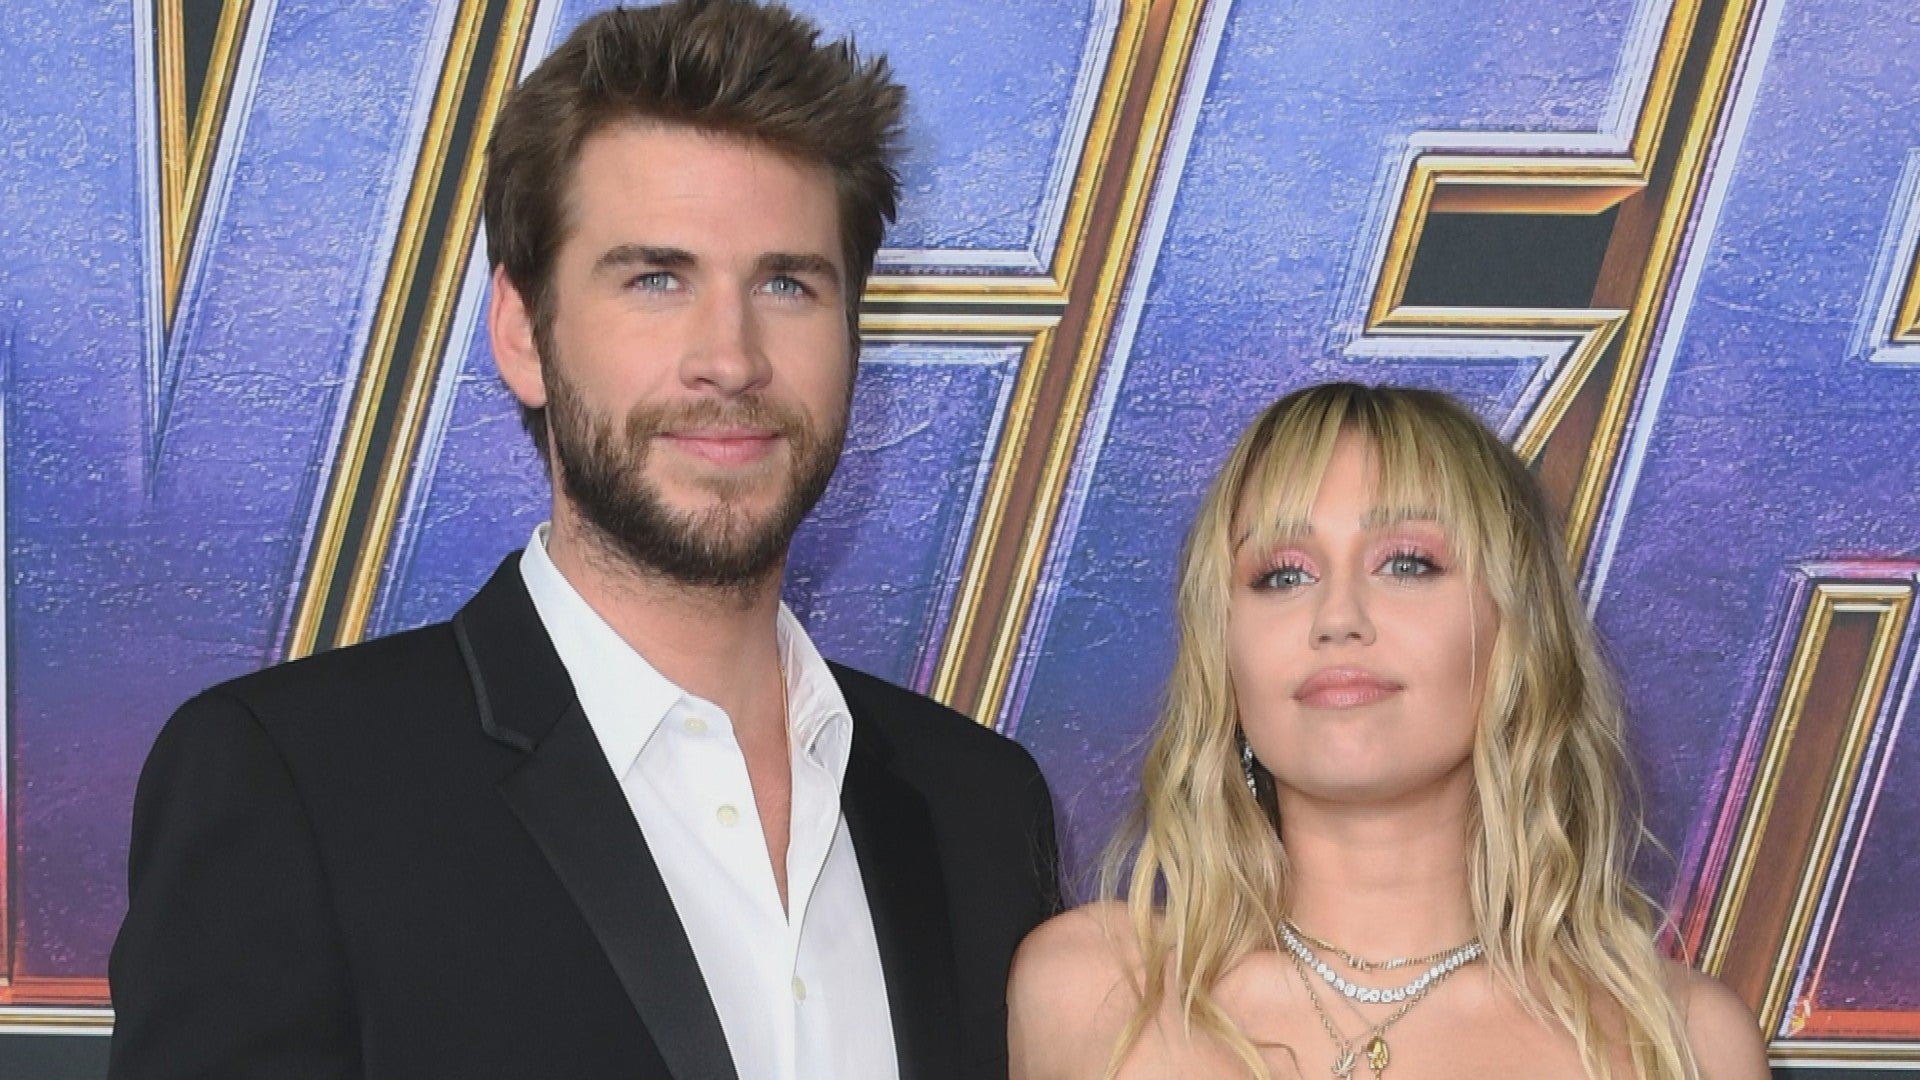 Miley Cyrus And Liam Hemsworth Shine On Avengers Endgame Red